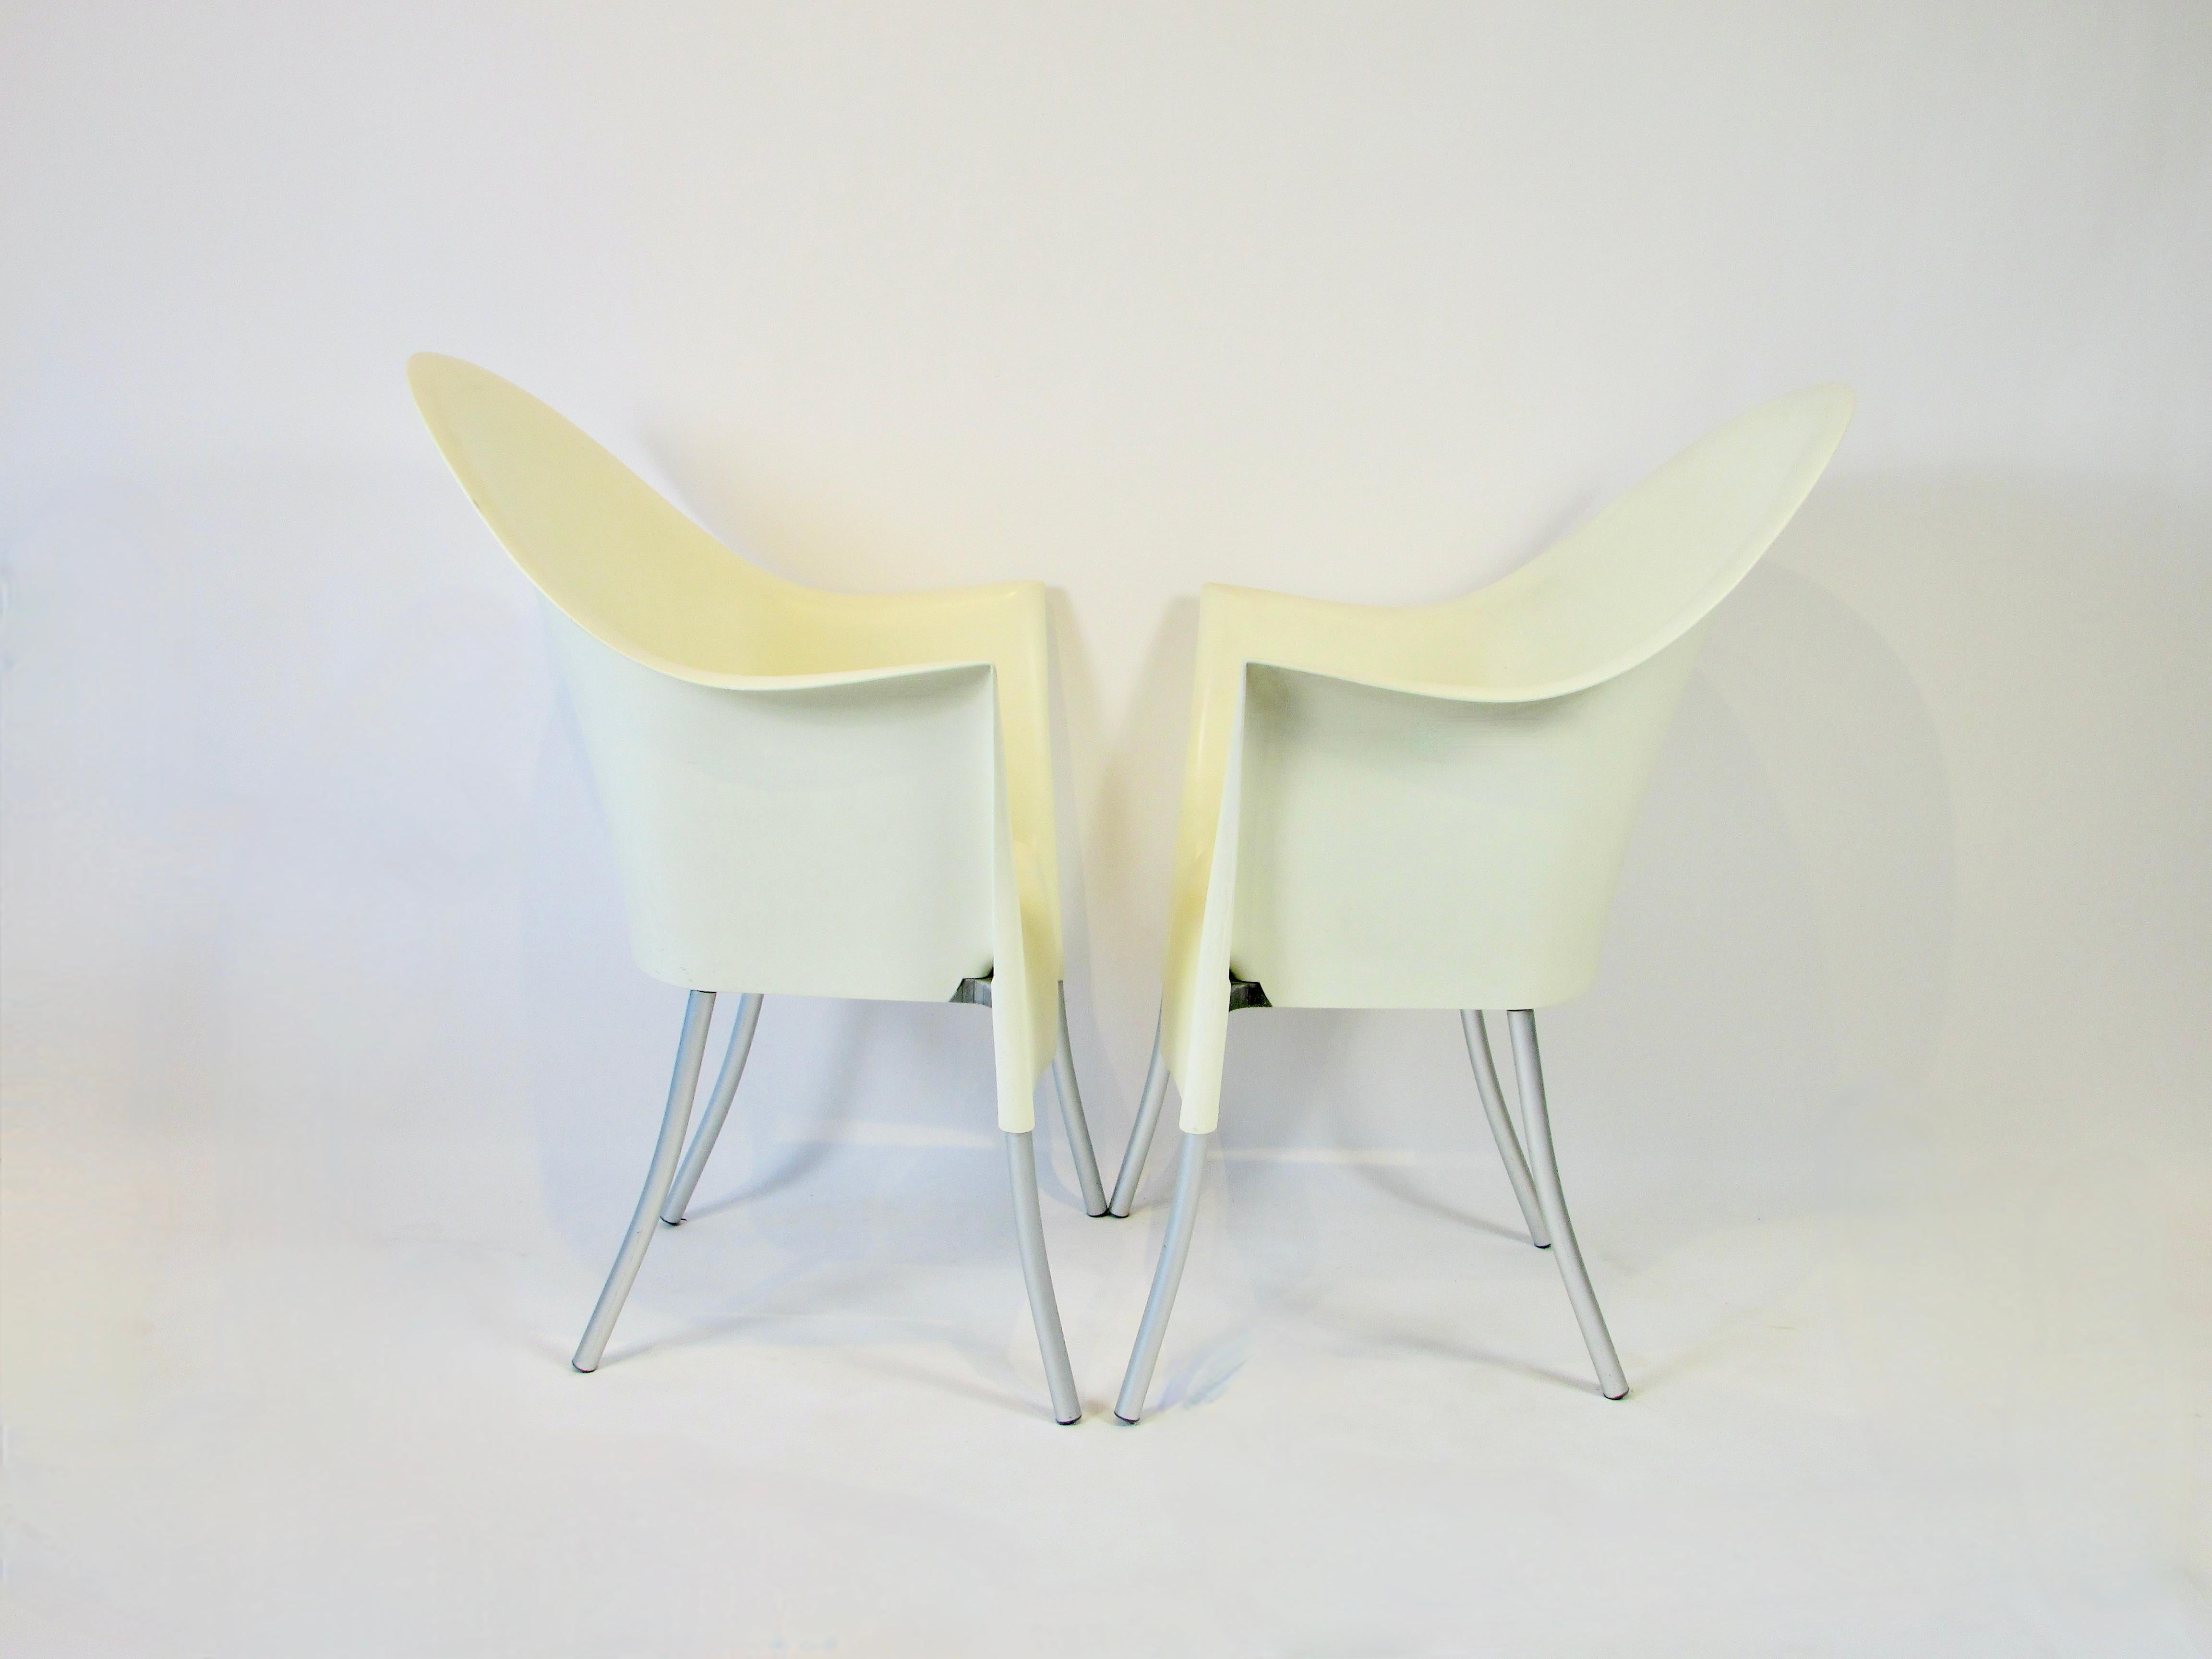 Four Phillipe Starck Lord Yo Aleph Stacking chairs Made in Italy In Good Condition For Sale In Ferndale, MI